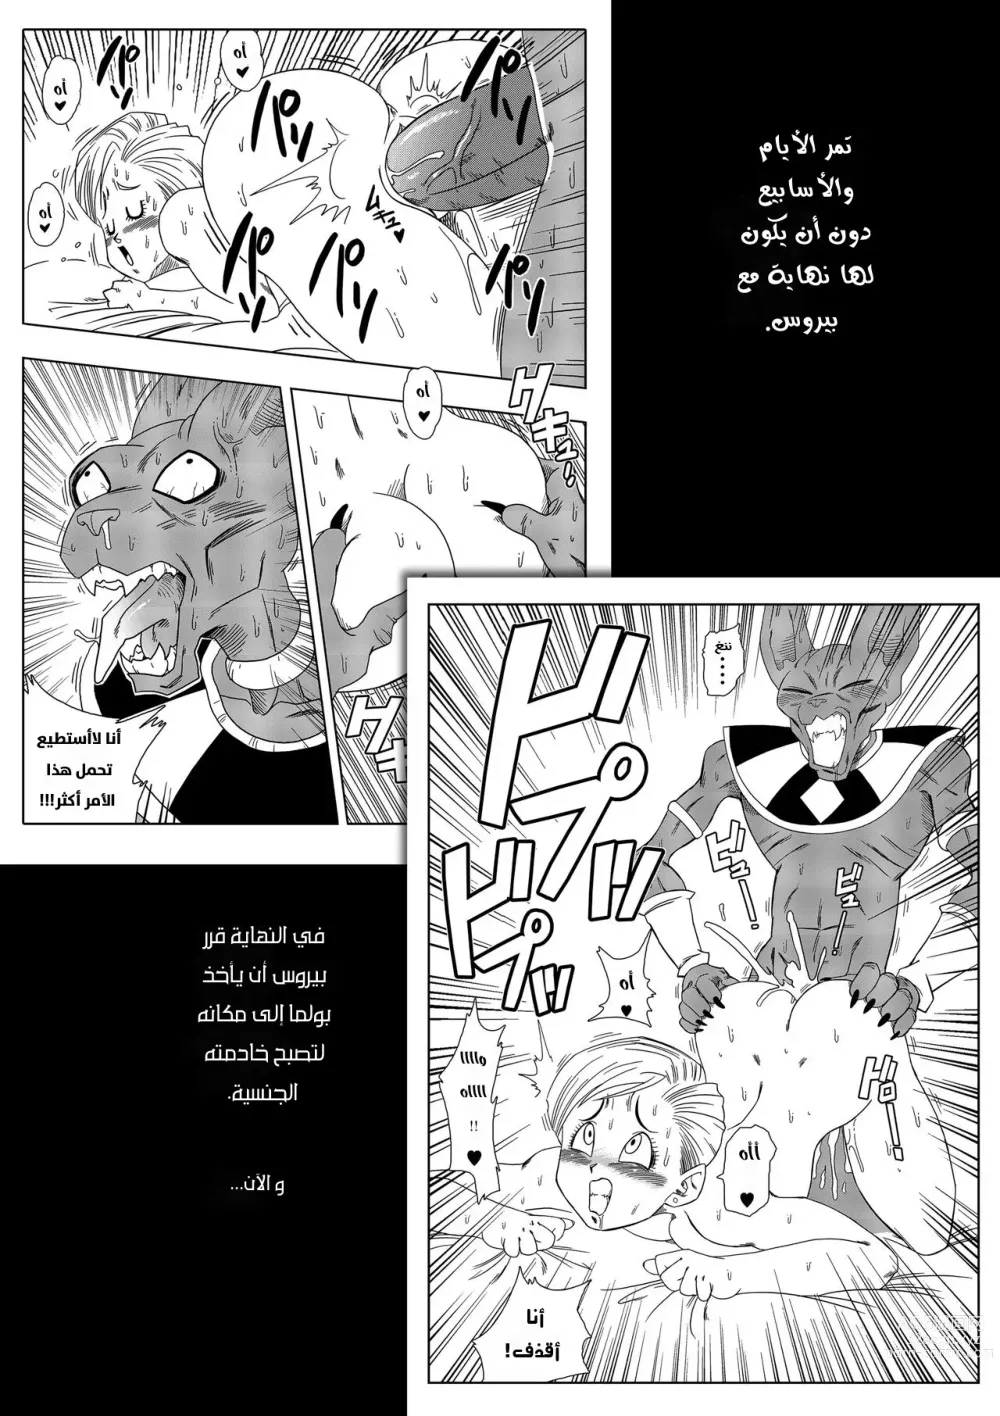 Page 4 of manga No One Disobeys Beerus! (uncensored)